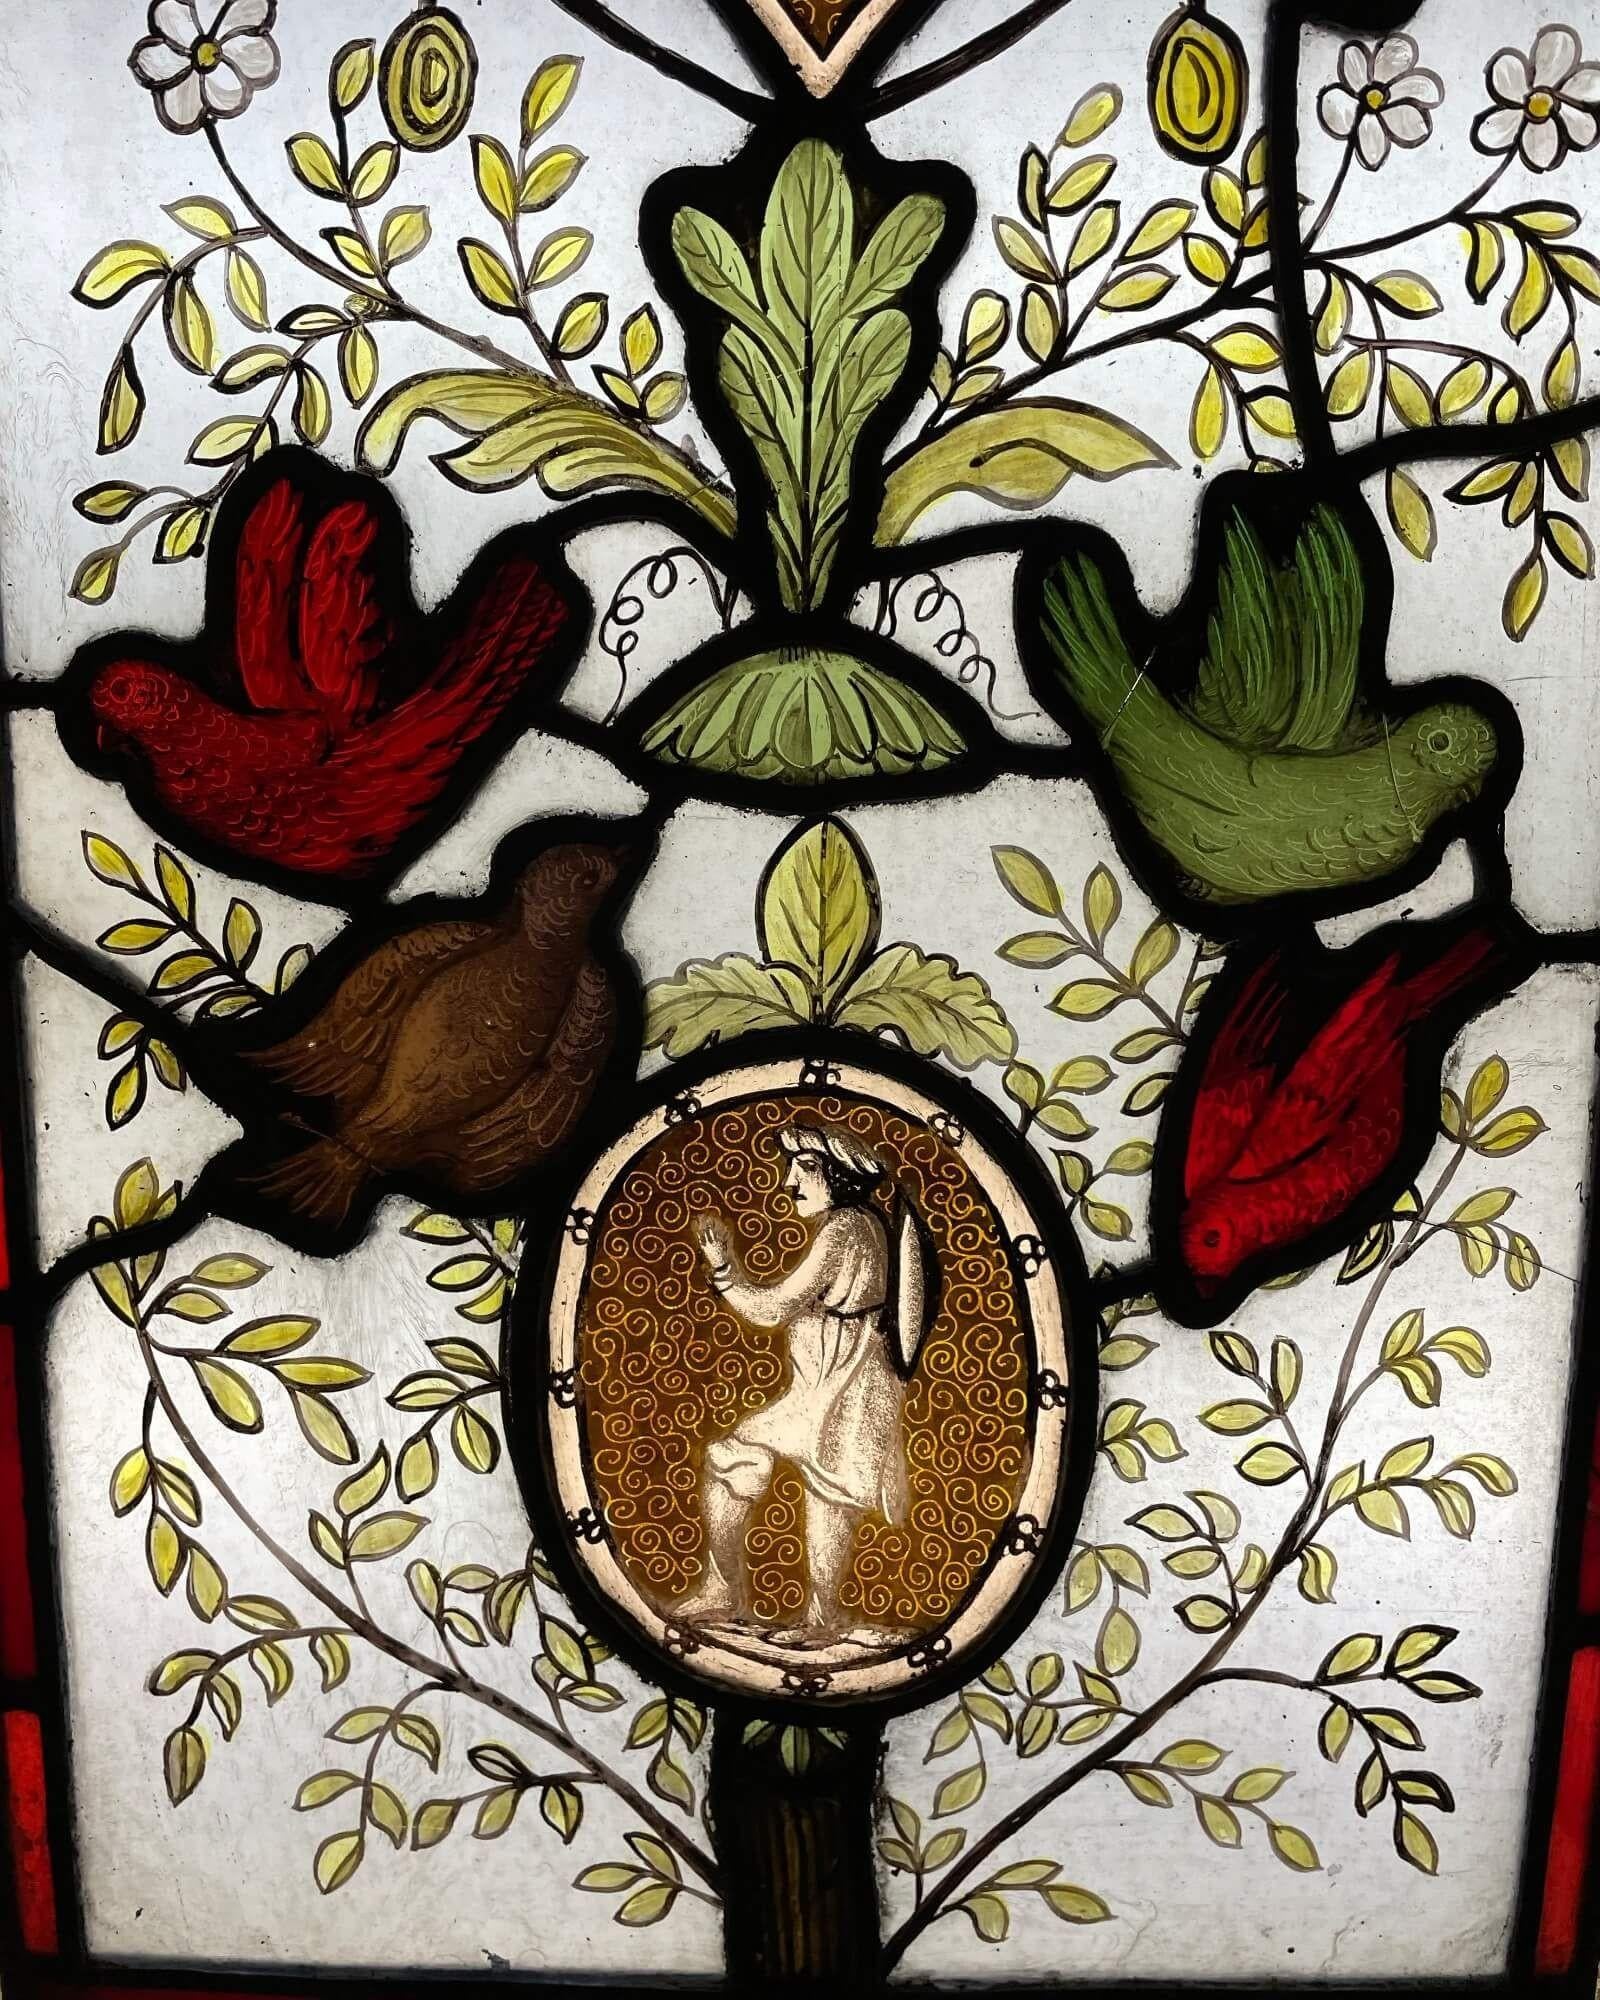 A beautiful Victorian era stained glass window depicting a tree of life style scene. We are also selling two other panels in a similar theme.

Dating to circa 1880, this antique stained glass is immersed in colour and intrigue, showcasing glass